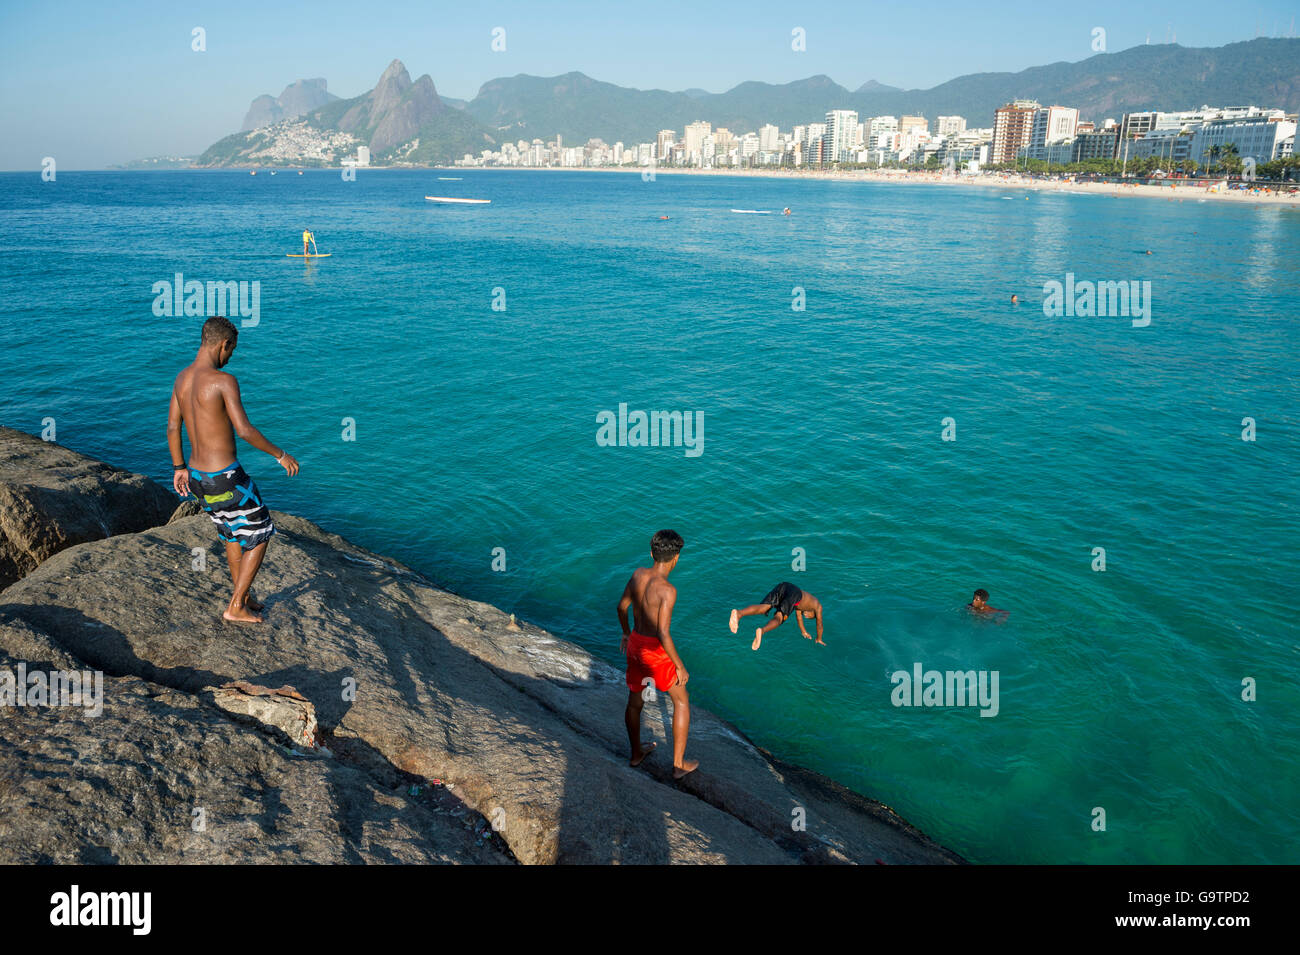 RIO DE JANEIRO - FEBRUARY 03, 2014: Group of young Brazilians gather to jump from the rocks at Arpoador at Ipanema Beach. Stock Photo